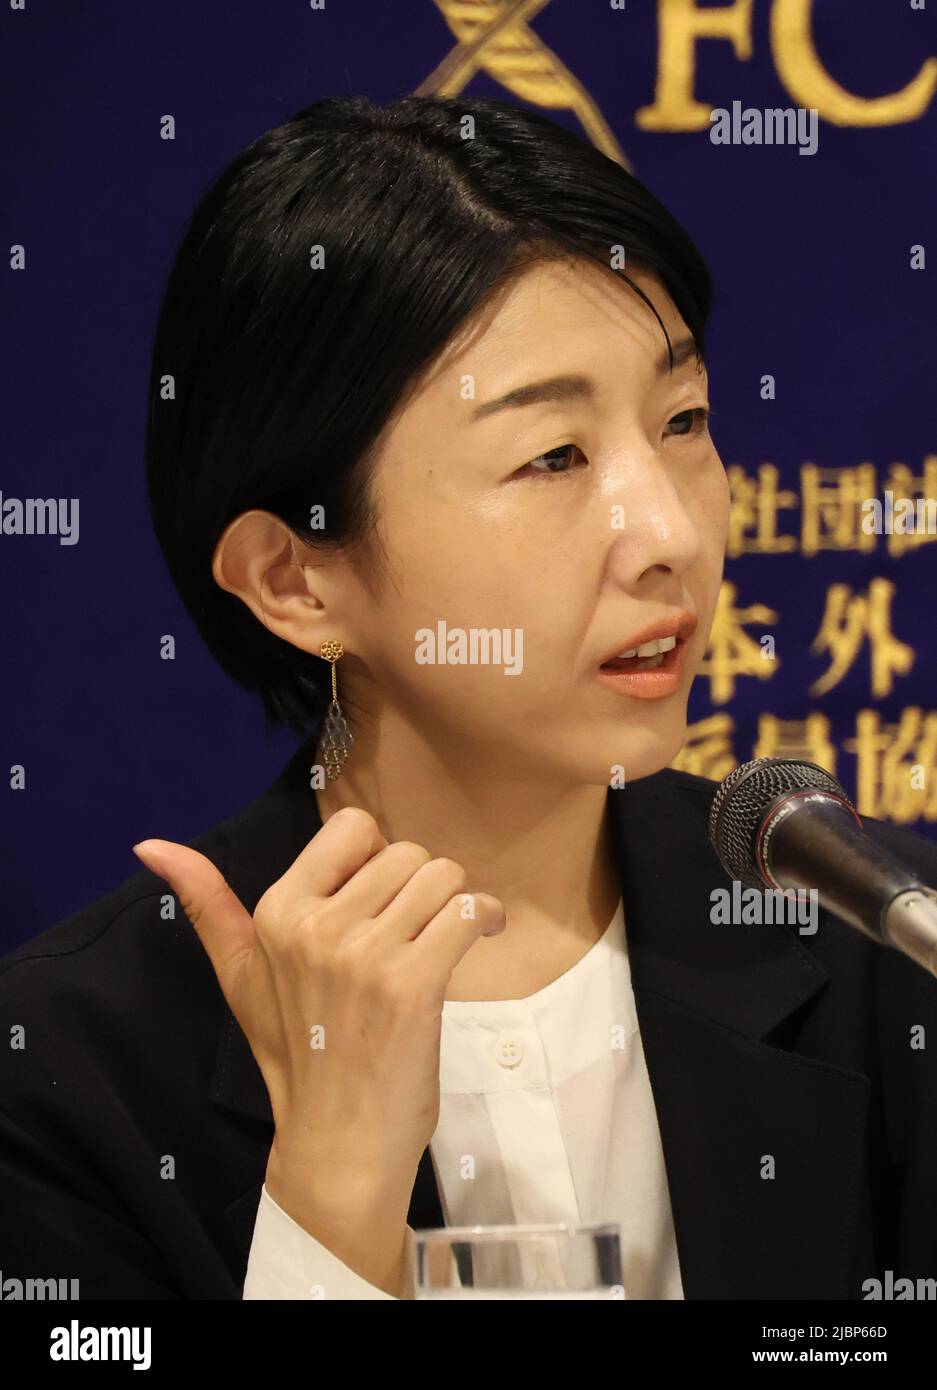 Tokyo, Japan. 7th June, 2022. Japanese film director Chie Hayakawa speaks at a press conference for her latest movie 'Plan 75' at the Foreign Correspondents' Club of Japan in Tokyo on Tuesday, June 7, 2022. Hayakawa received a special mention by the jury of the Camera d'Or award for the debut film at the Cannes Film Festival last month. Credit: Yoshio Tsunoda/AFLO/Alamy Live News Stock Photo